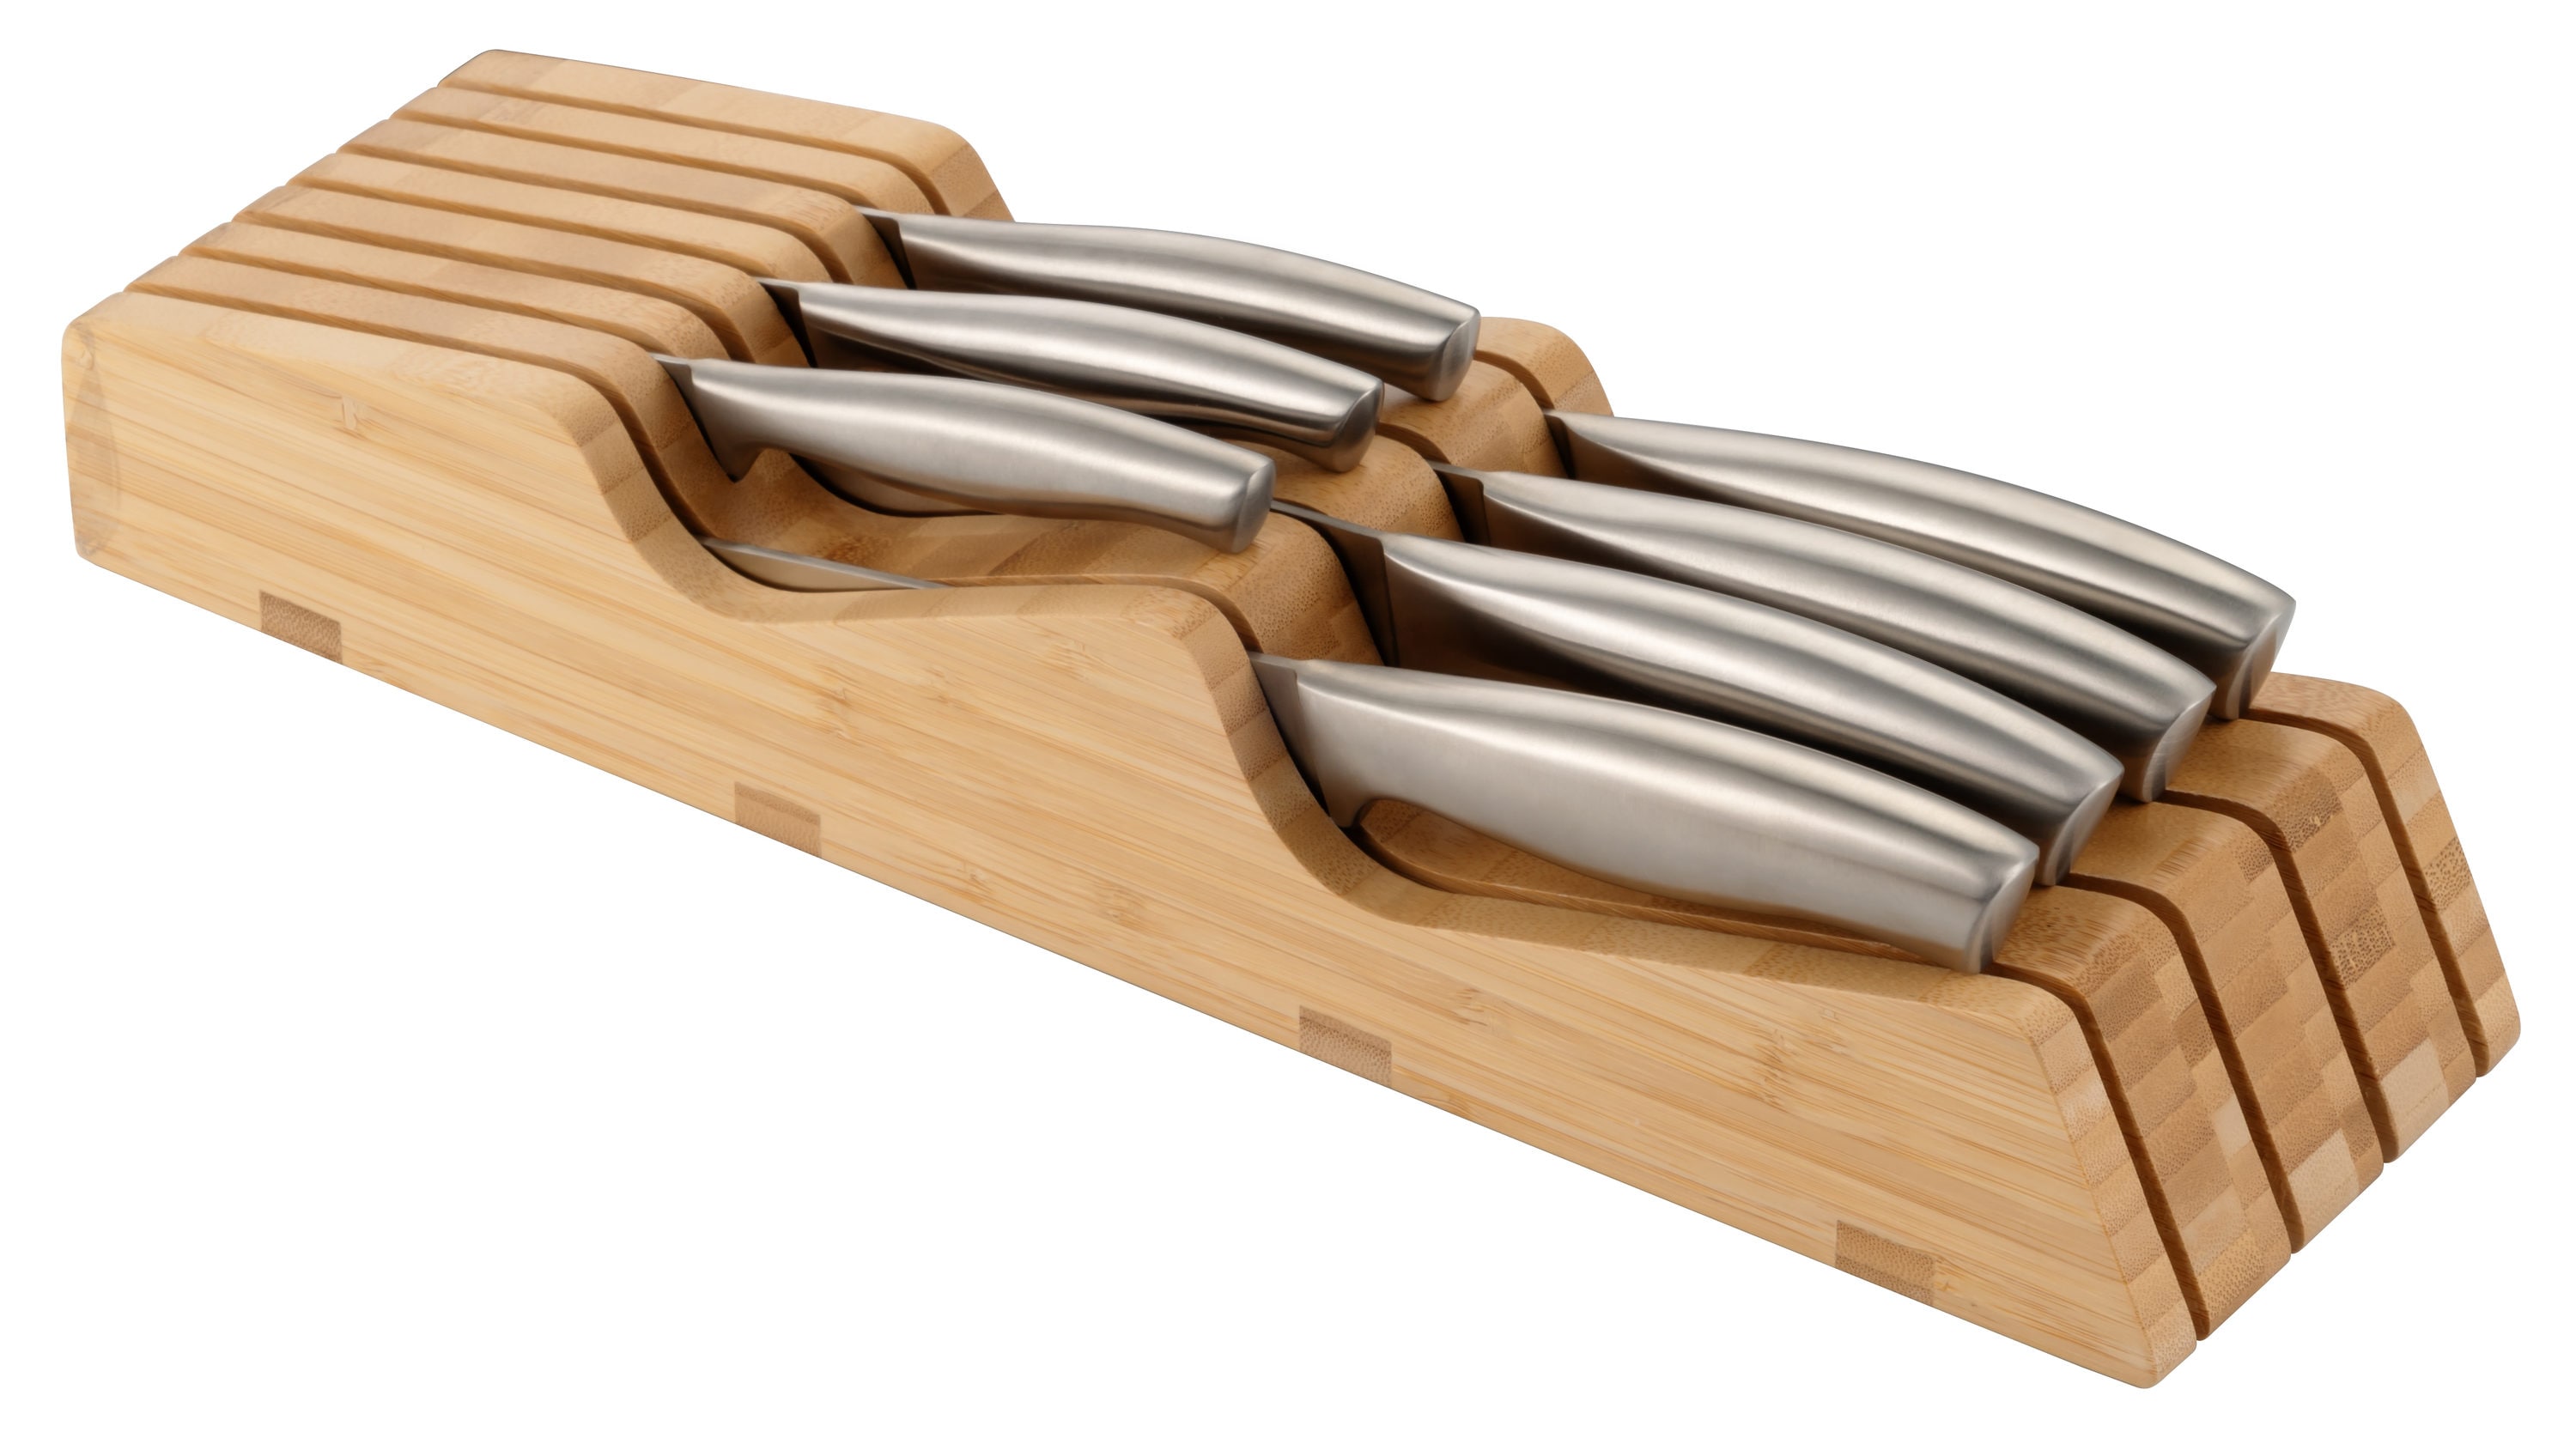 Ozeri Handcrafted 8-Piece Stainless Steel Knife Set - Japanese